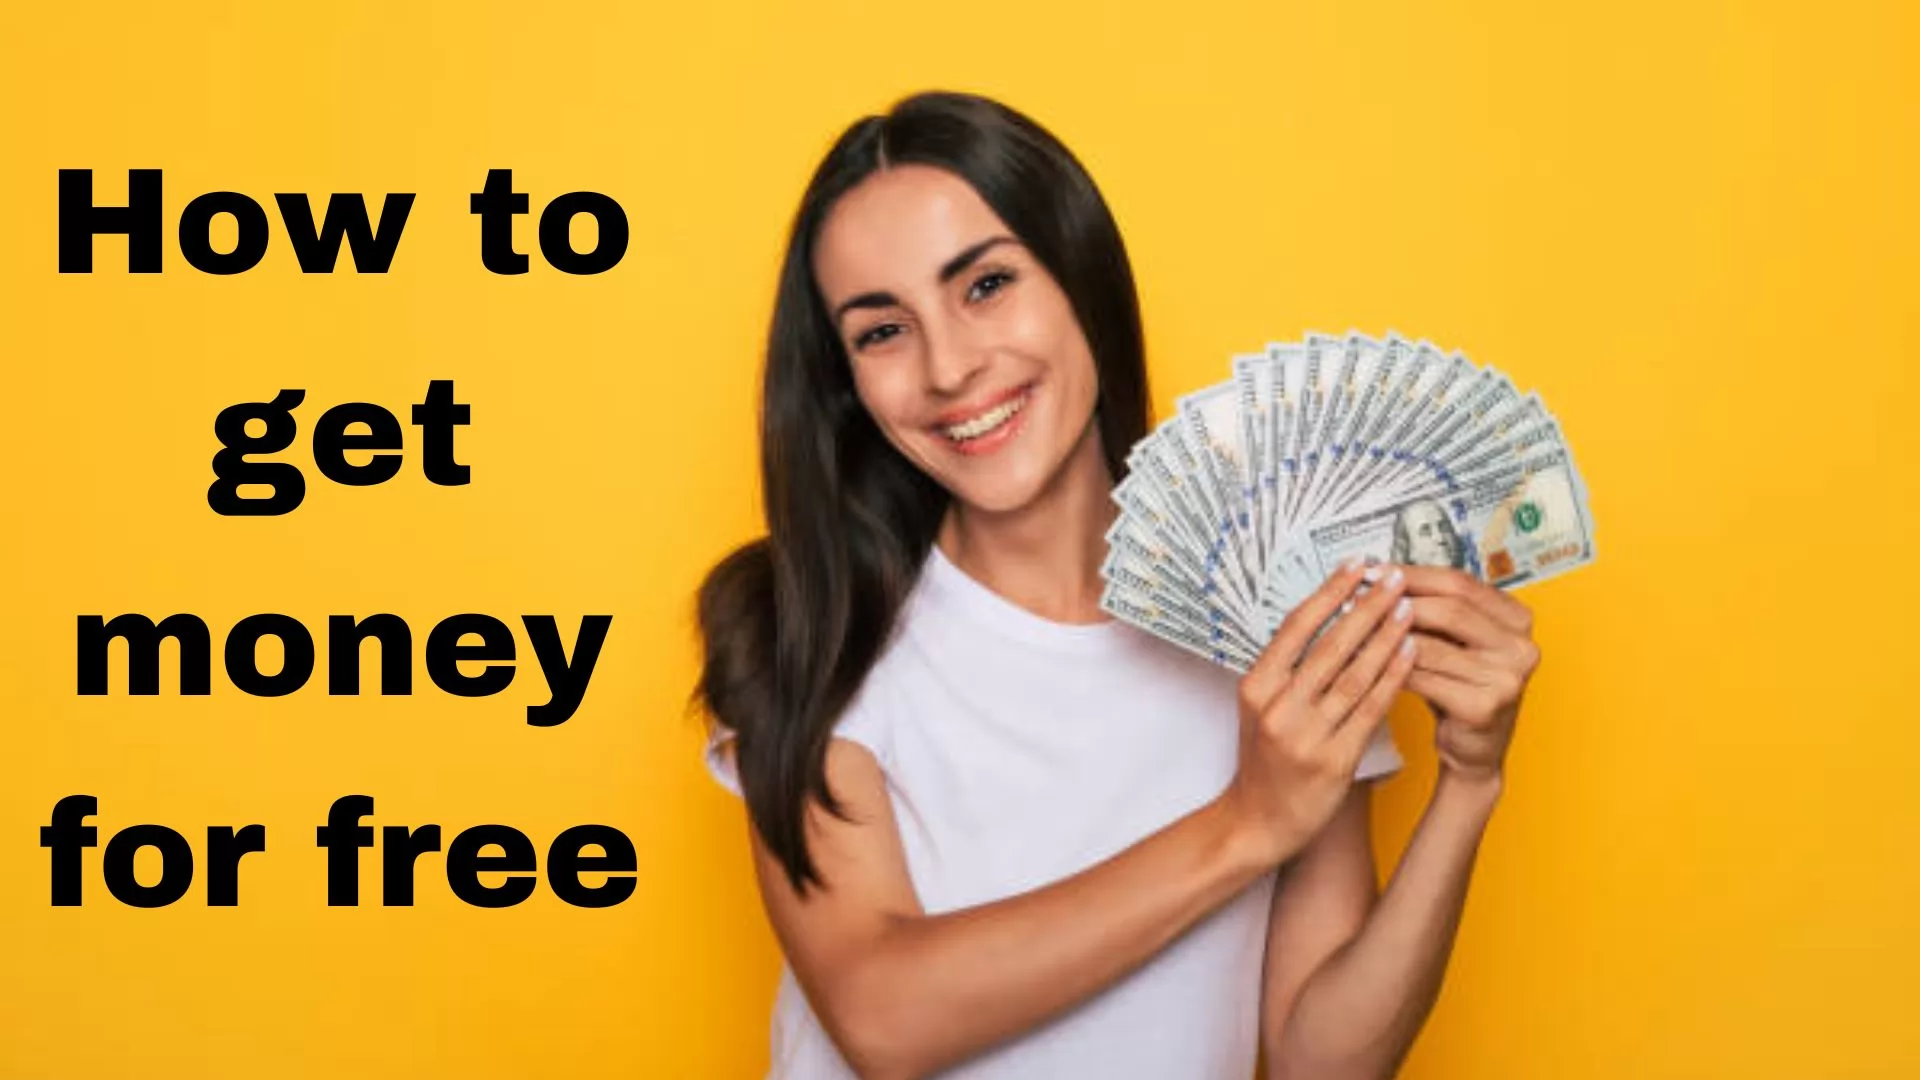 How to get money for free